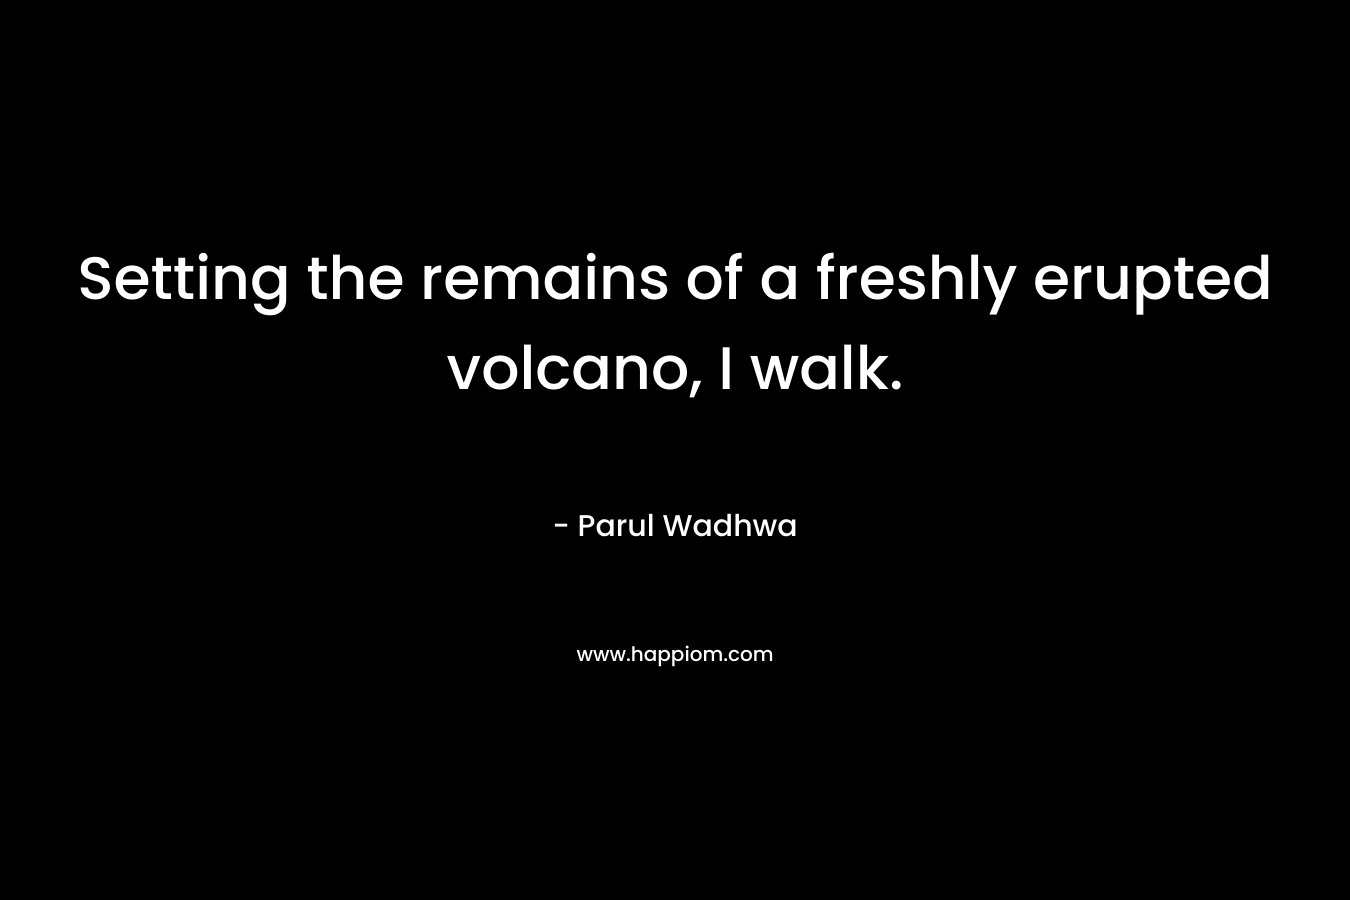 Setting the remains of a freshly erupted volcano, I walk. – Parul Wadhwa